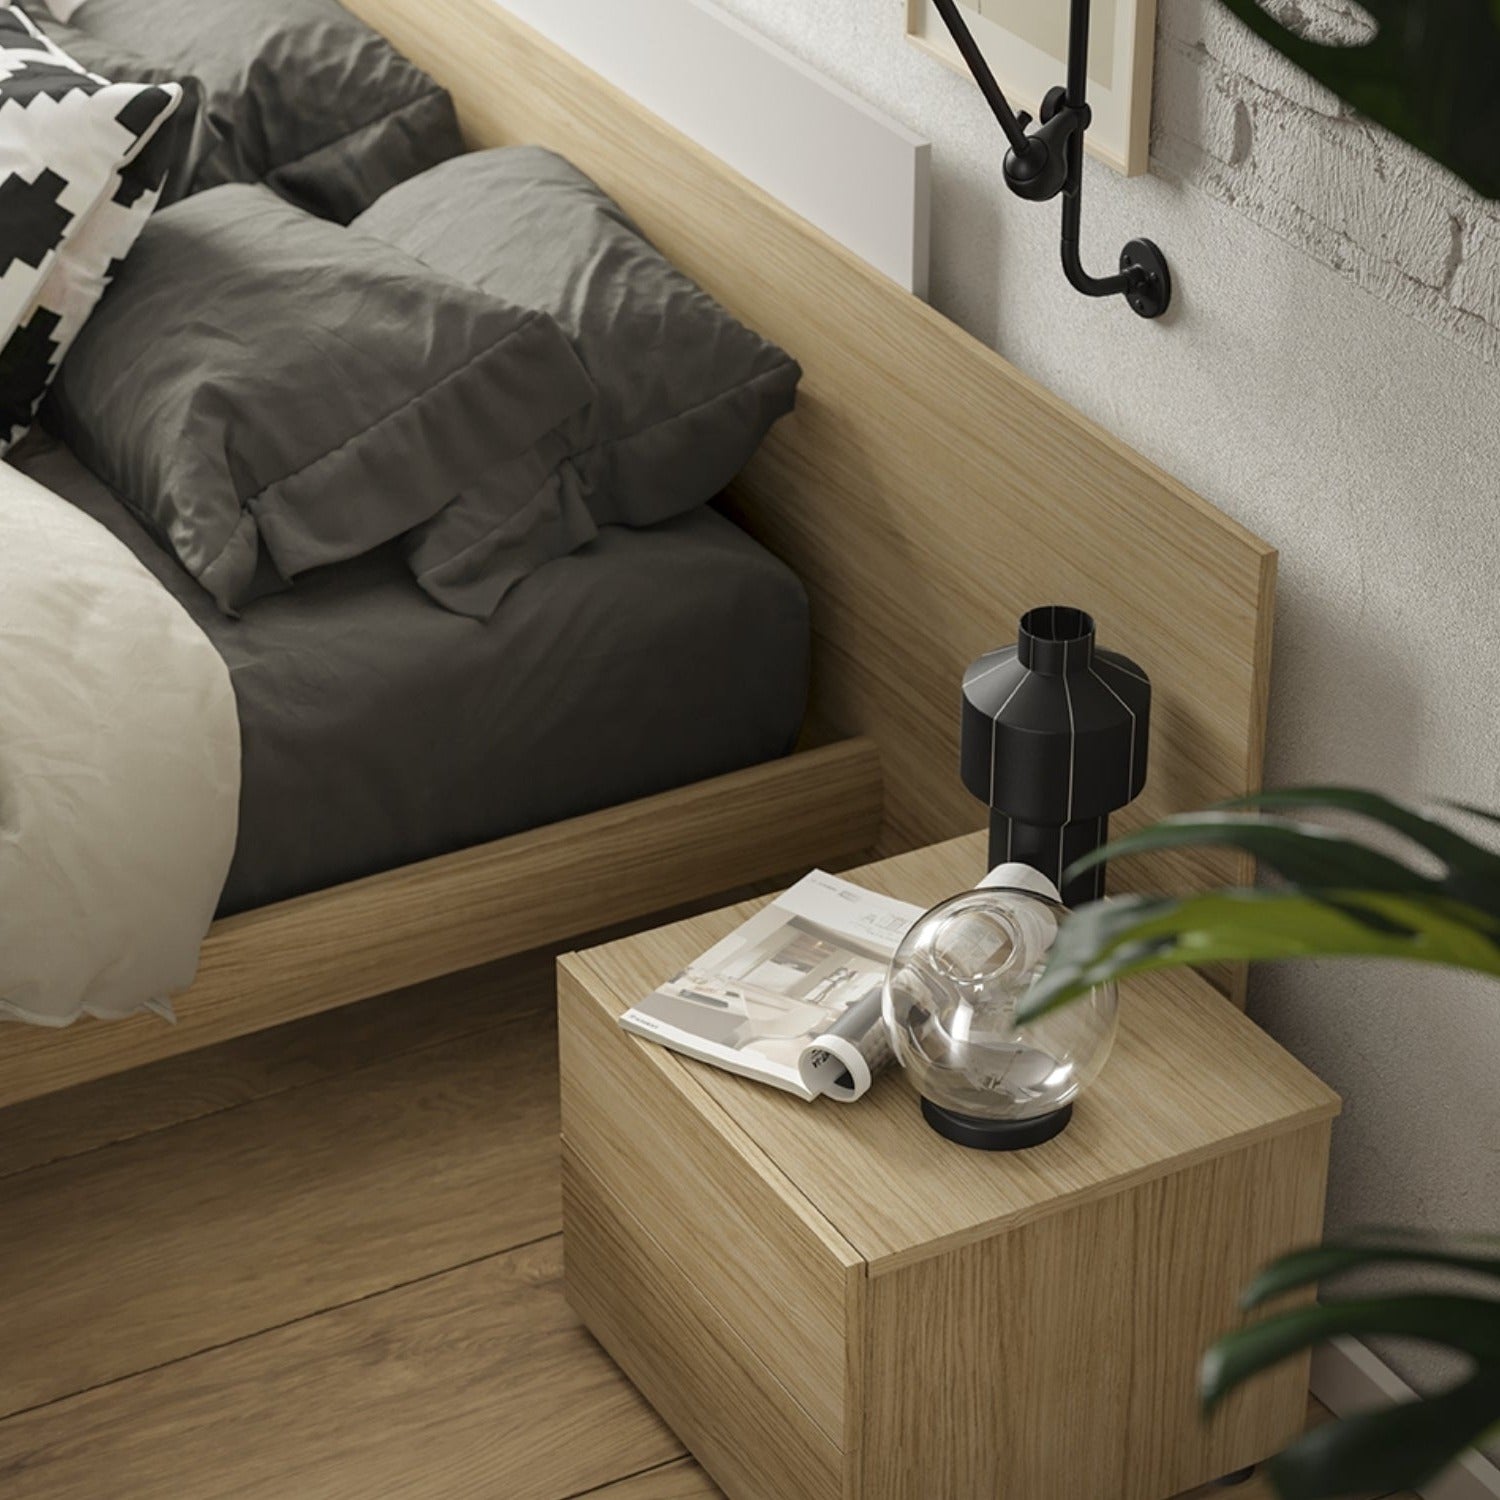 Dama Wooden Bed by Santa Lucia